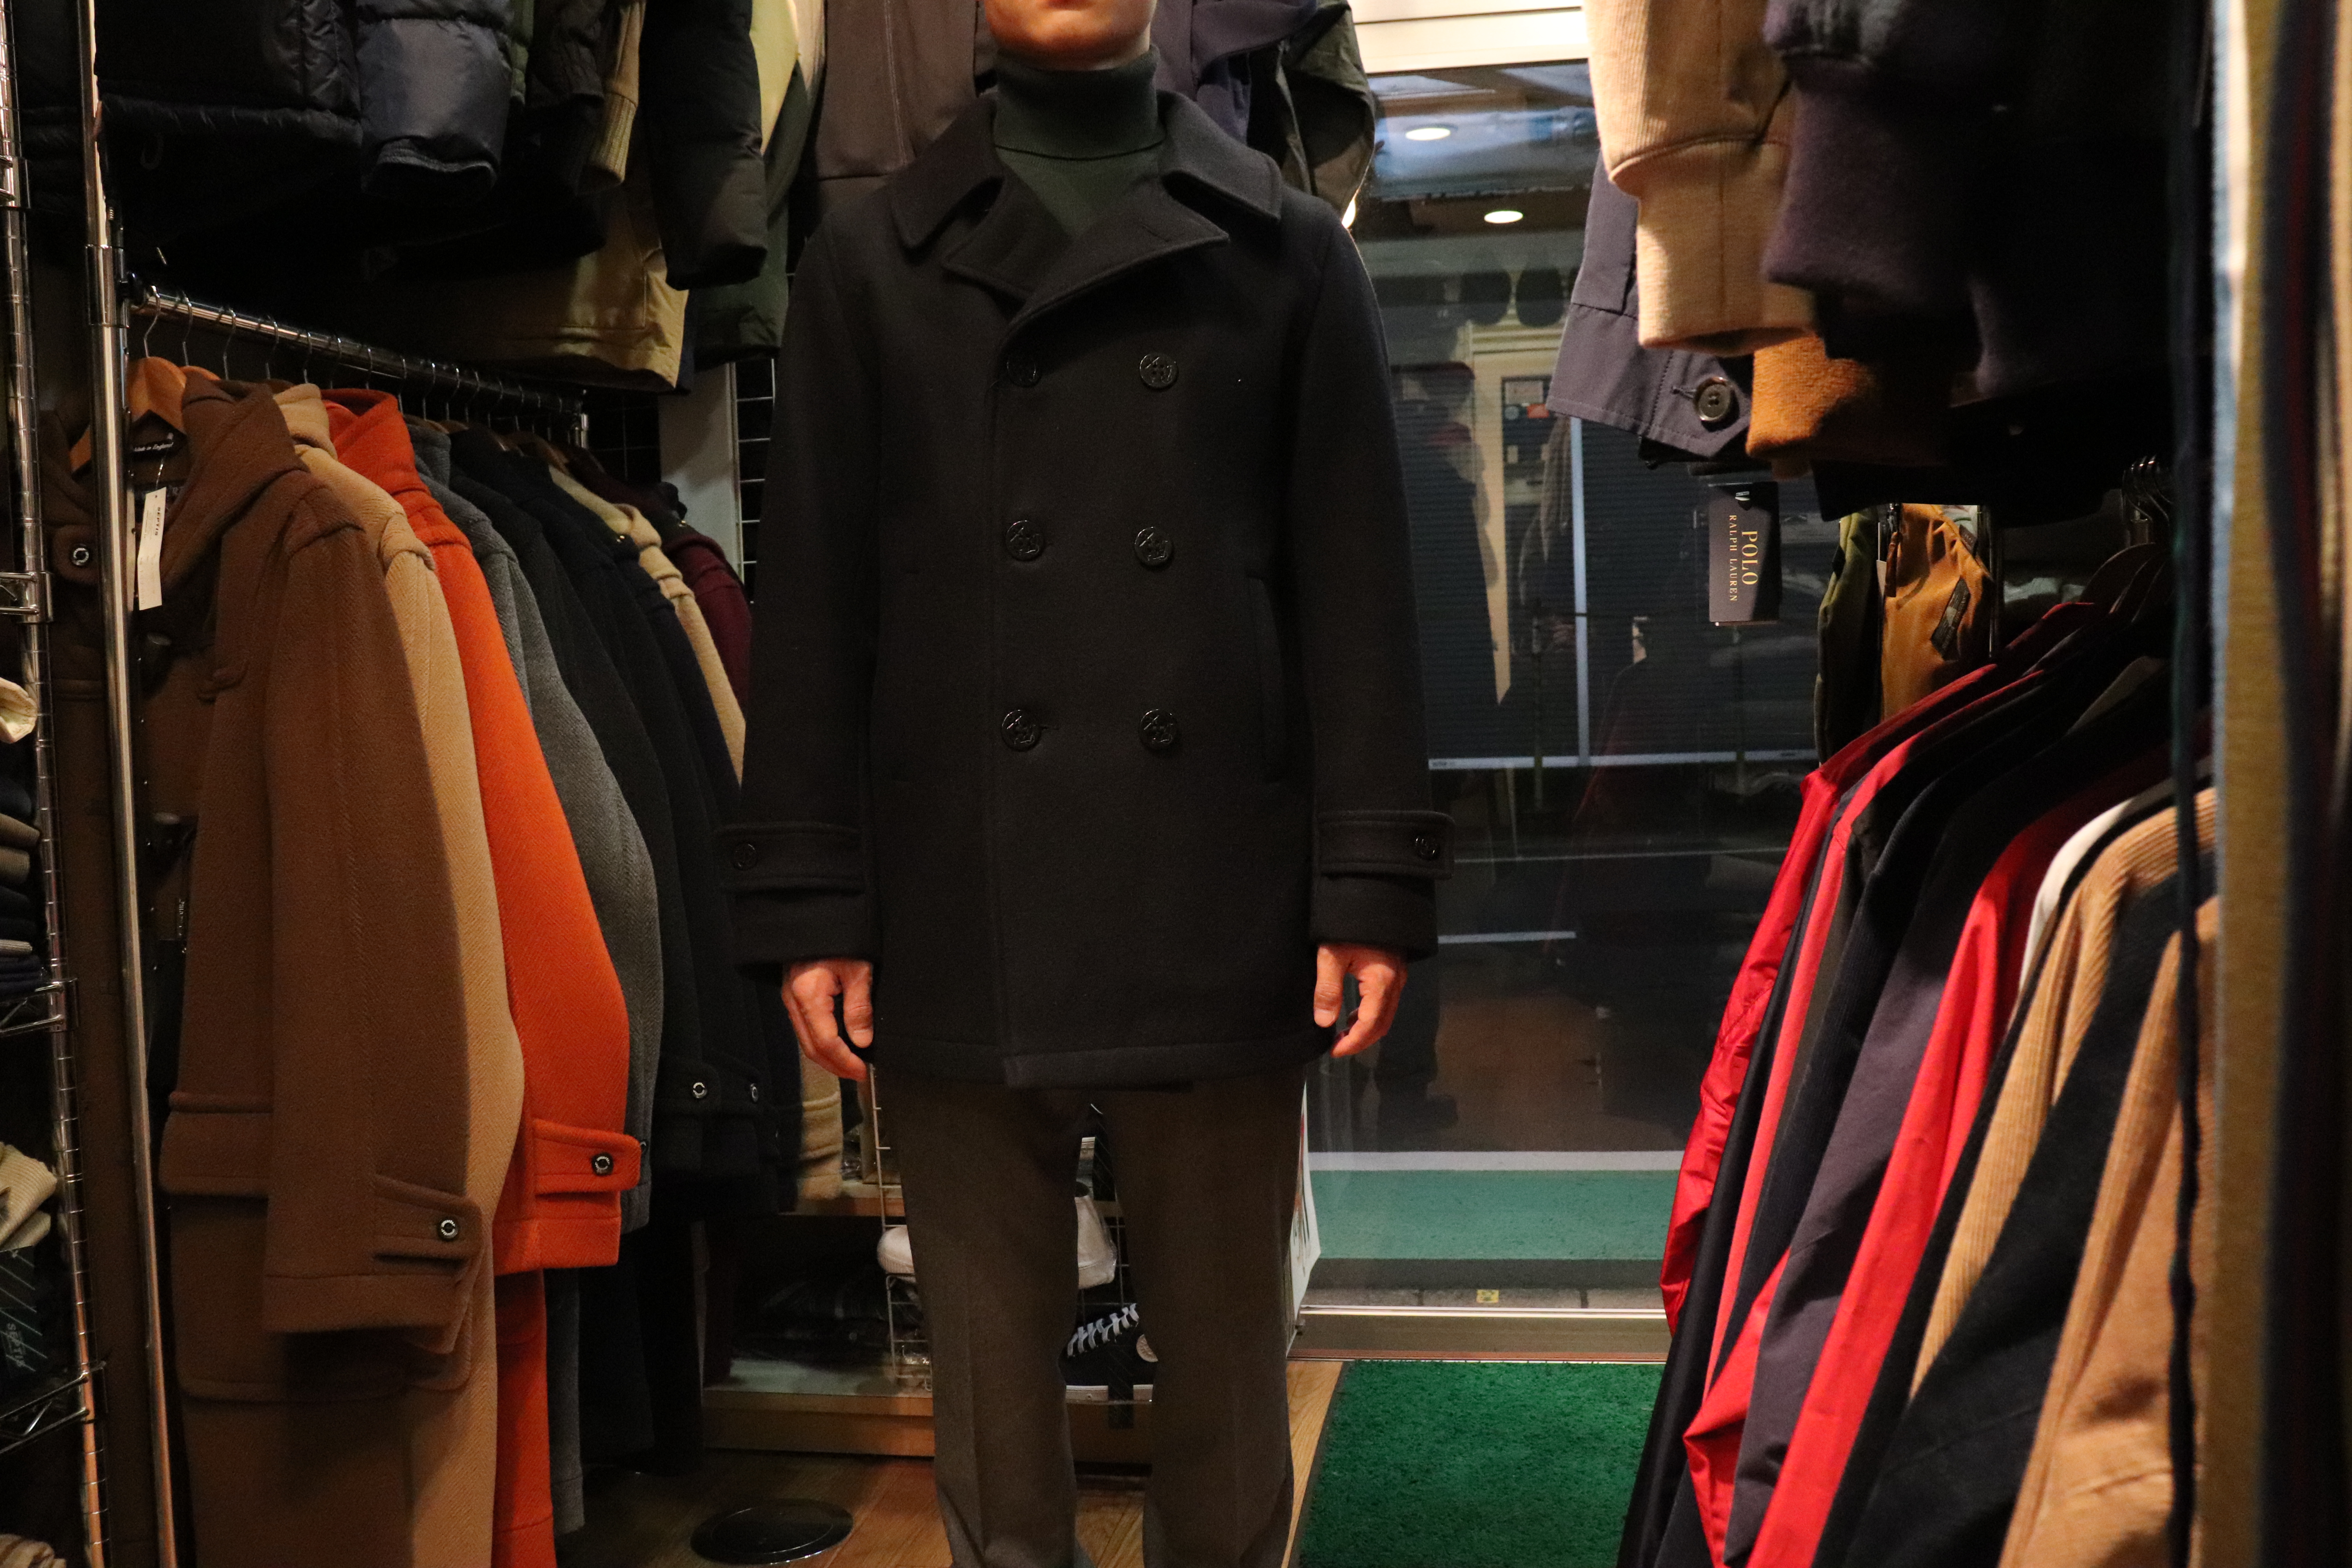 NEW ARRIVAL] FIDELITY / PEA COAT | SELECT STORE SEPTIS